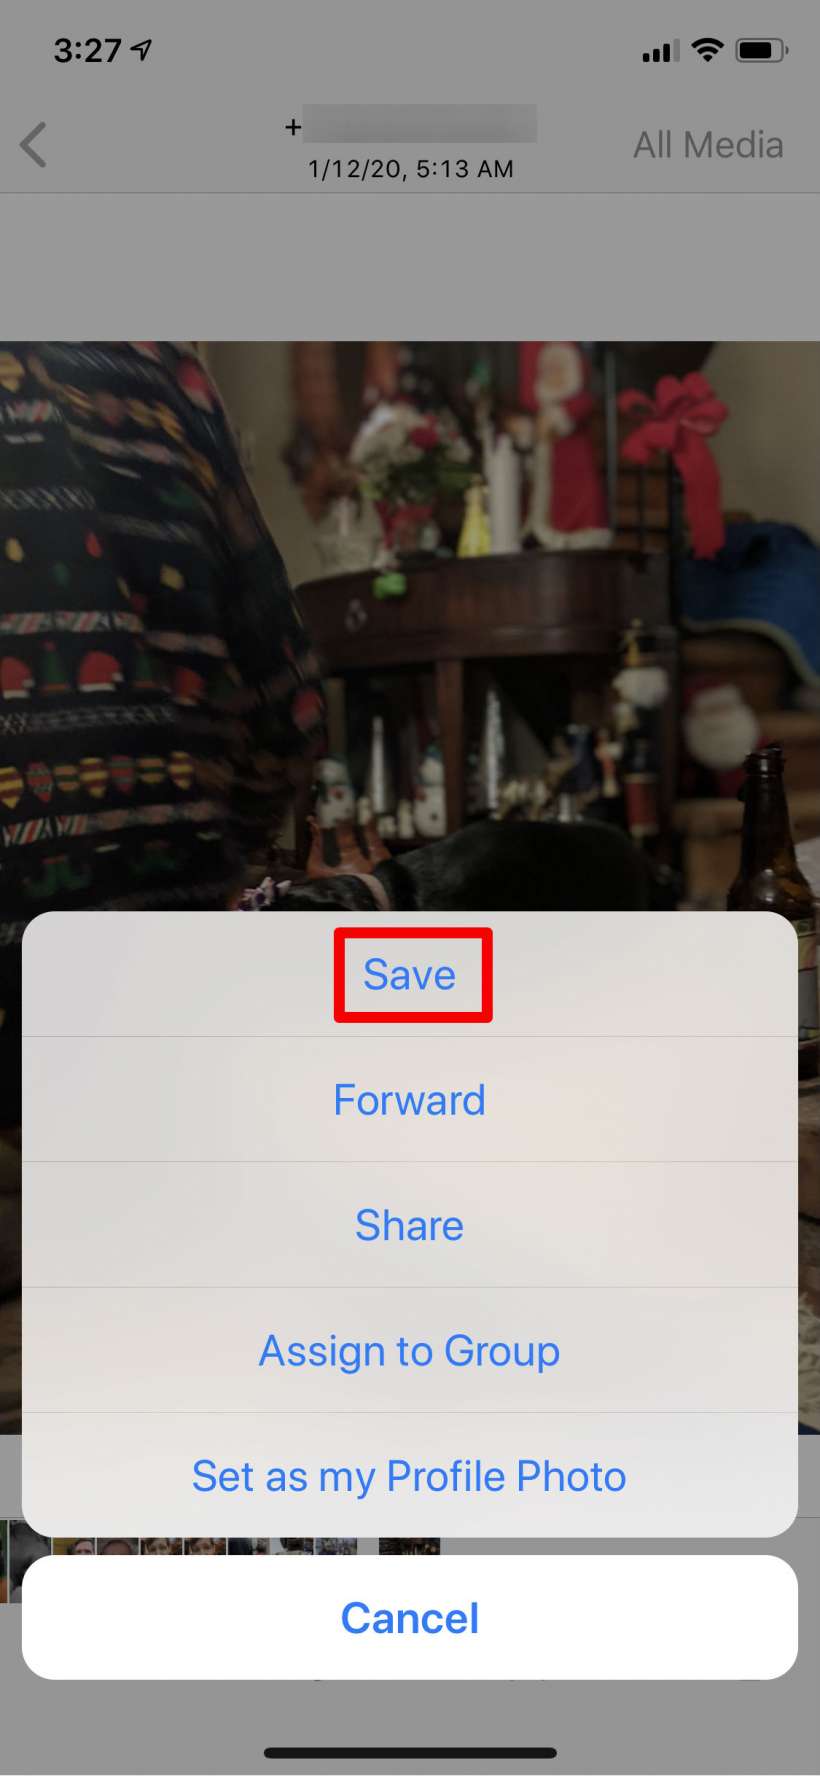 How to stop WhatsApp from automatically saving photos to your Photo Library on iPhone and iPad.